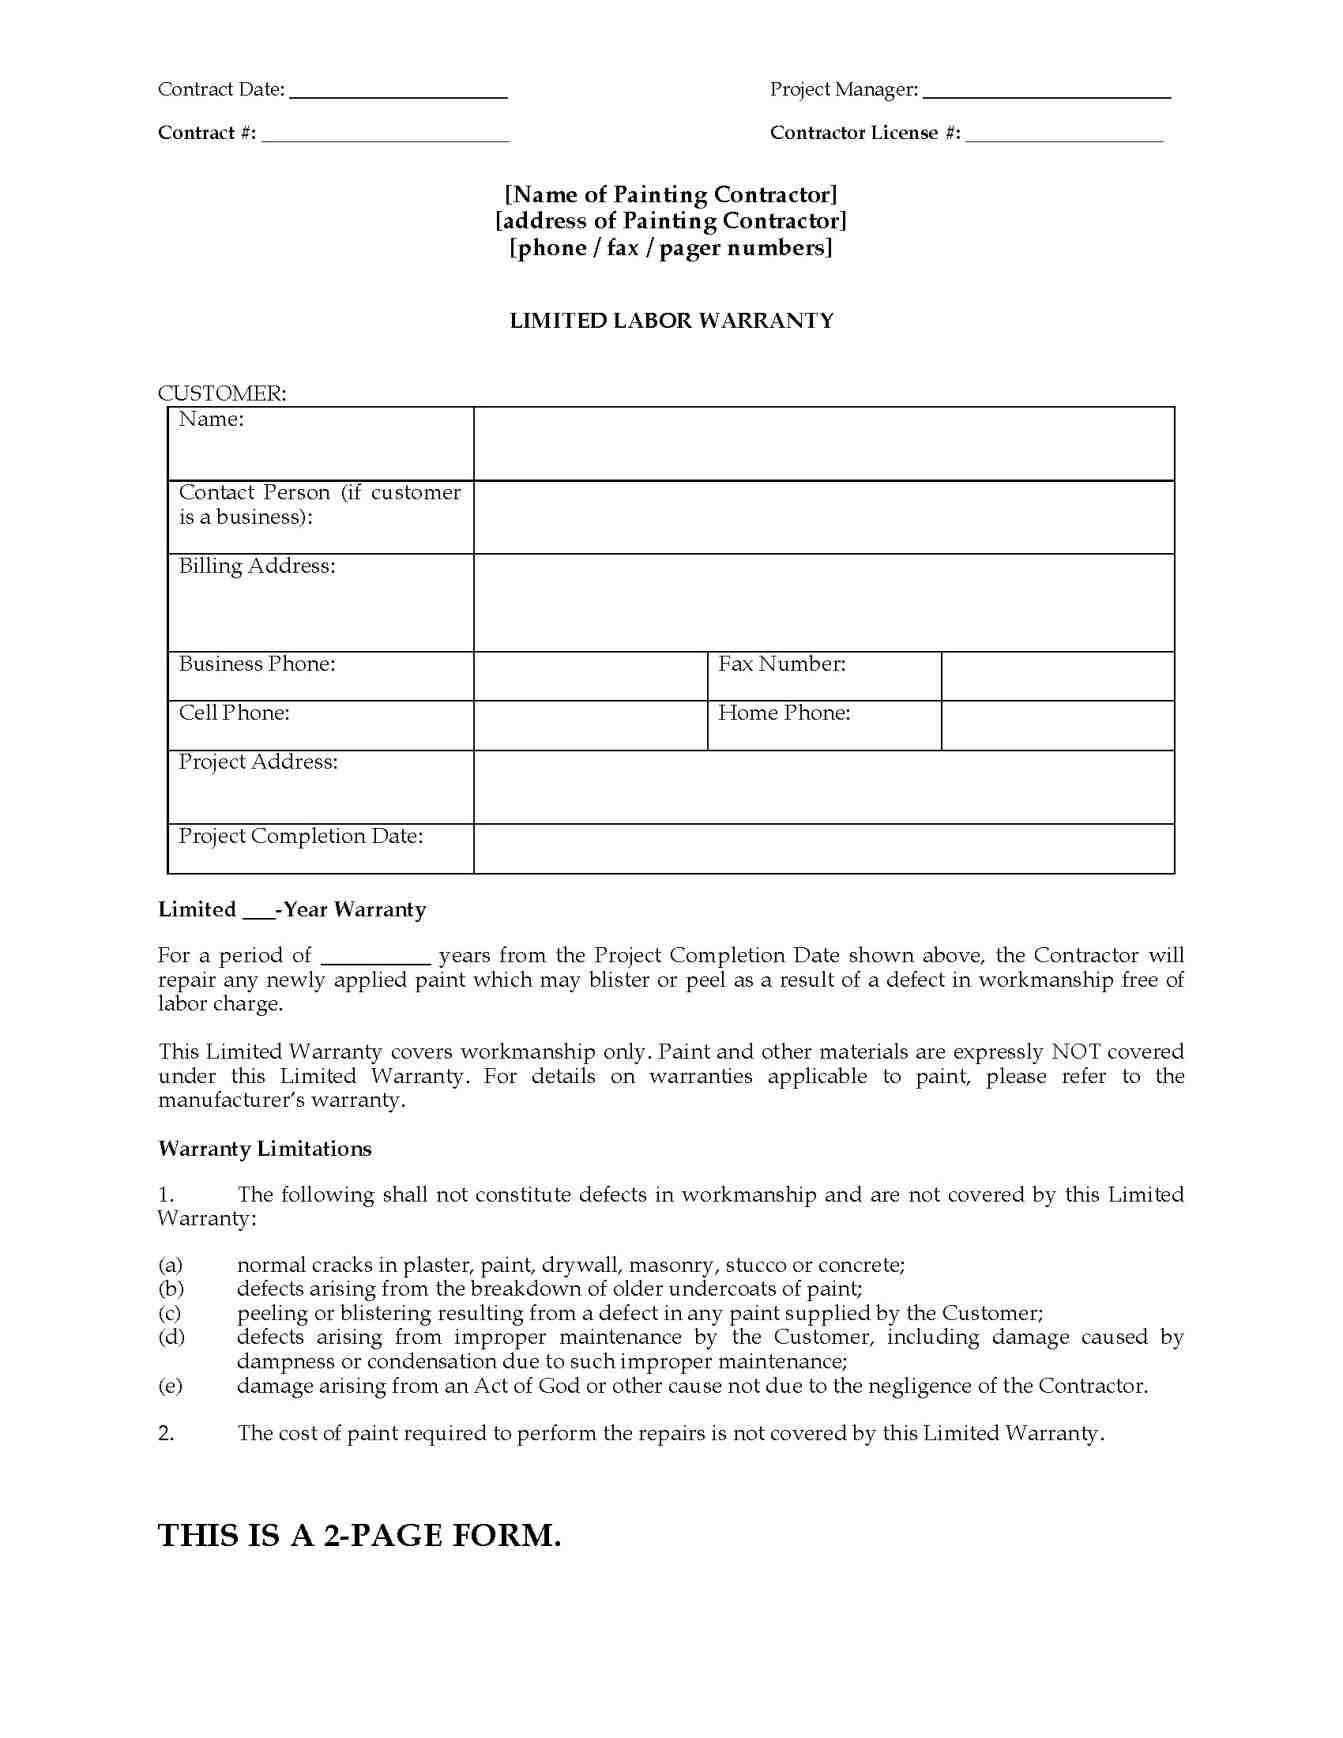 Construction Warranty Letter Template Free - Free Example Letter Award Of Contract Letter Fresh Ranked Mercial